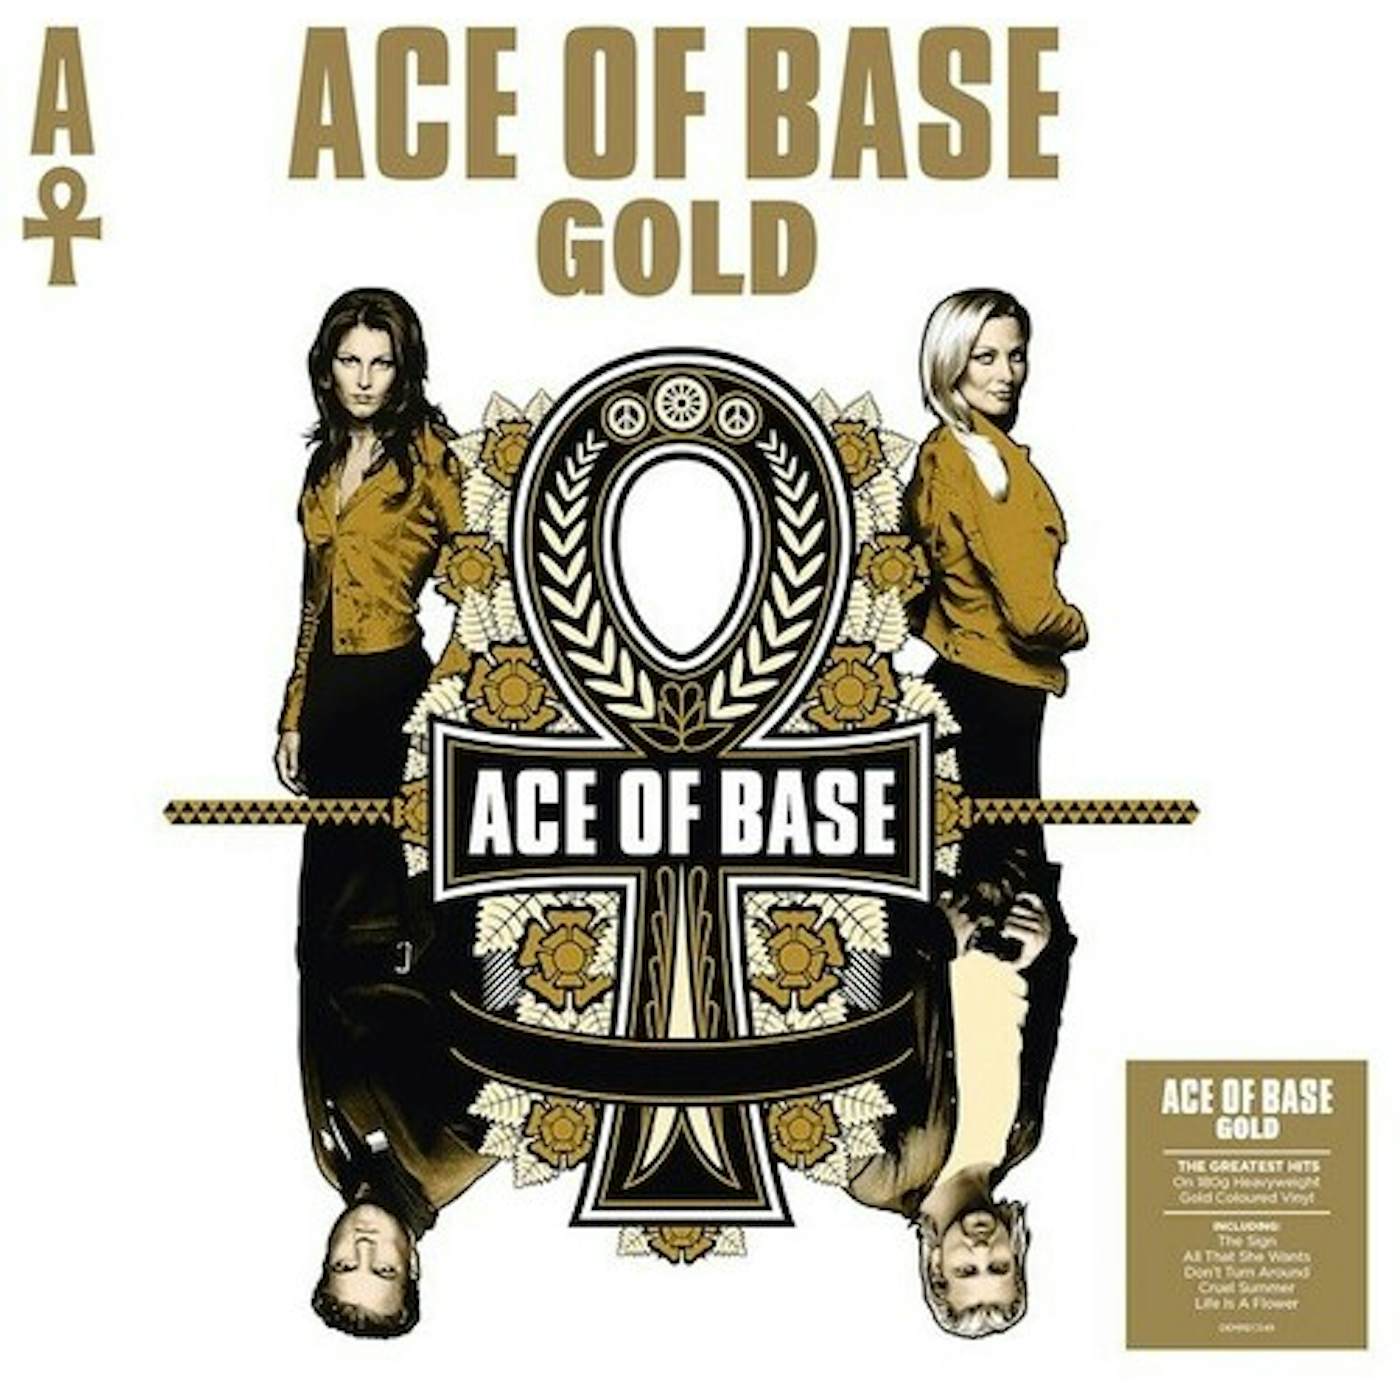 Ace of Base Gold Vinyl Record